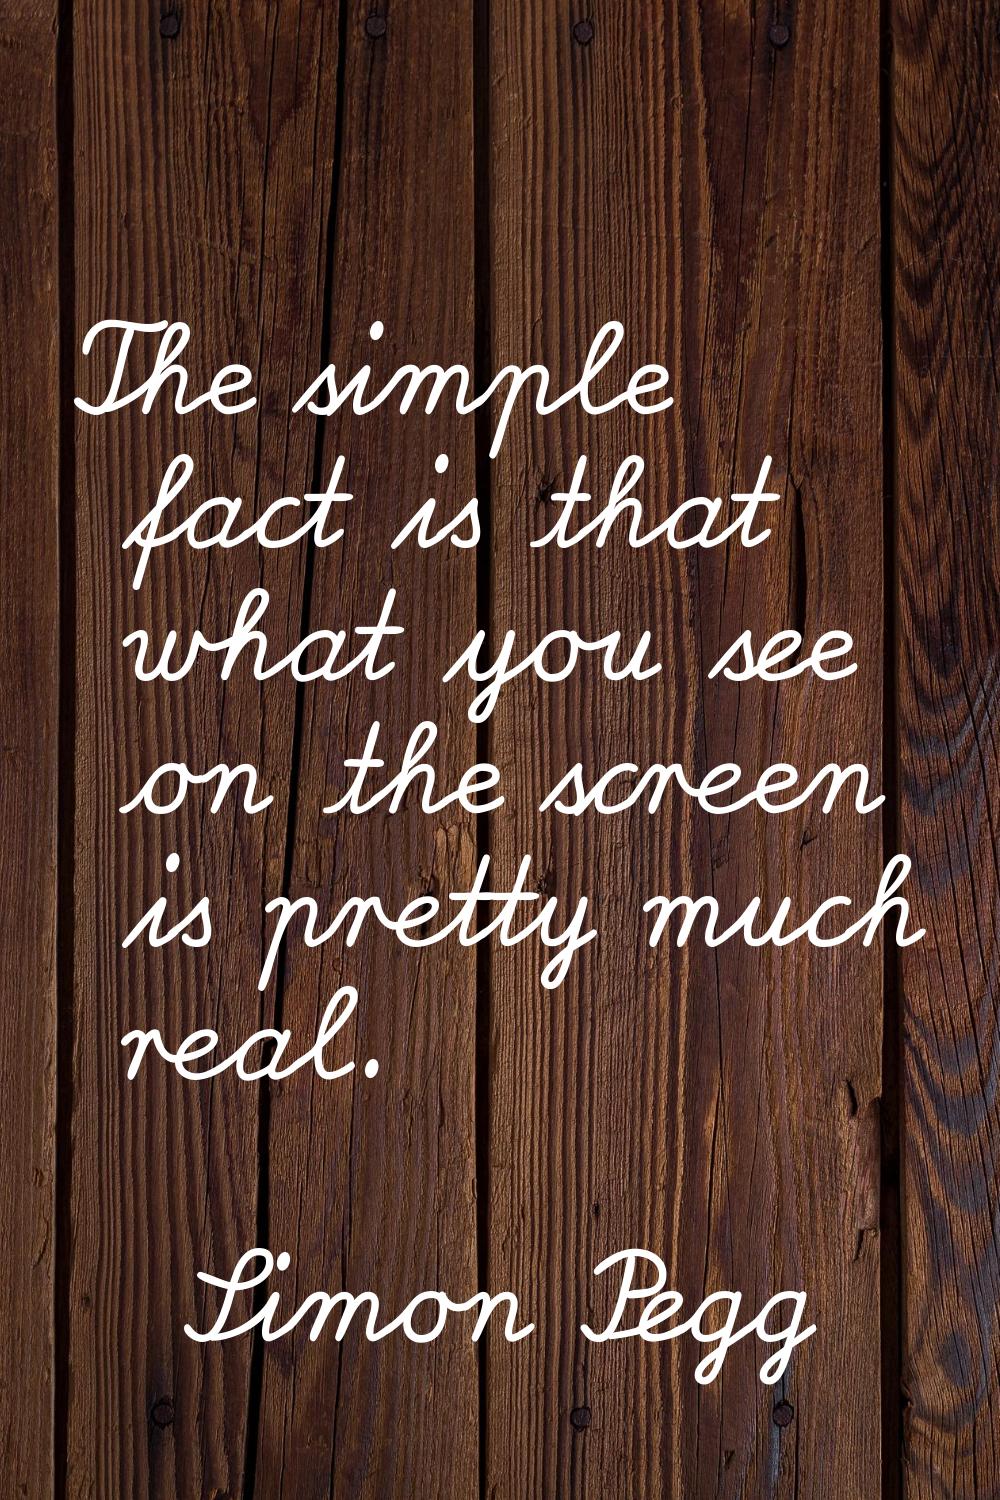 The simple fact is that what you see on the screen is pretty much real.